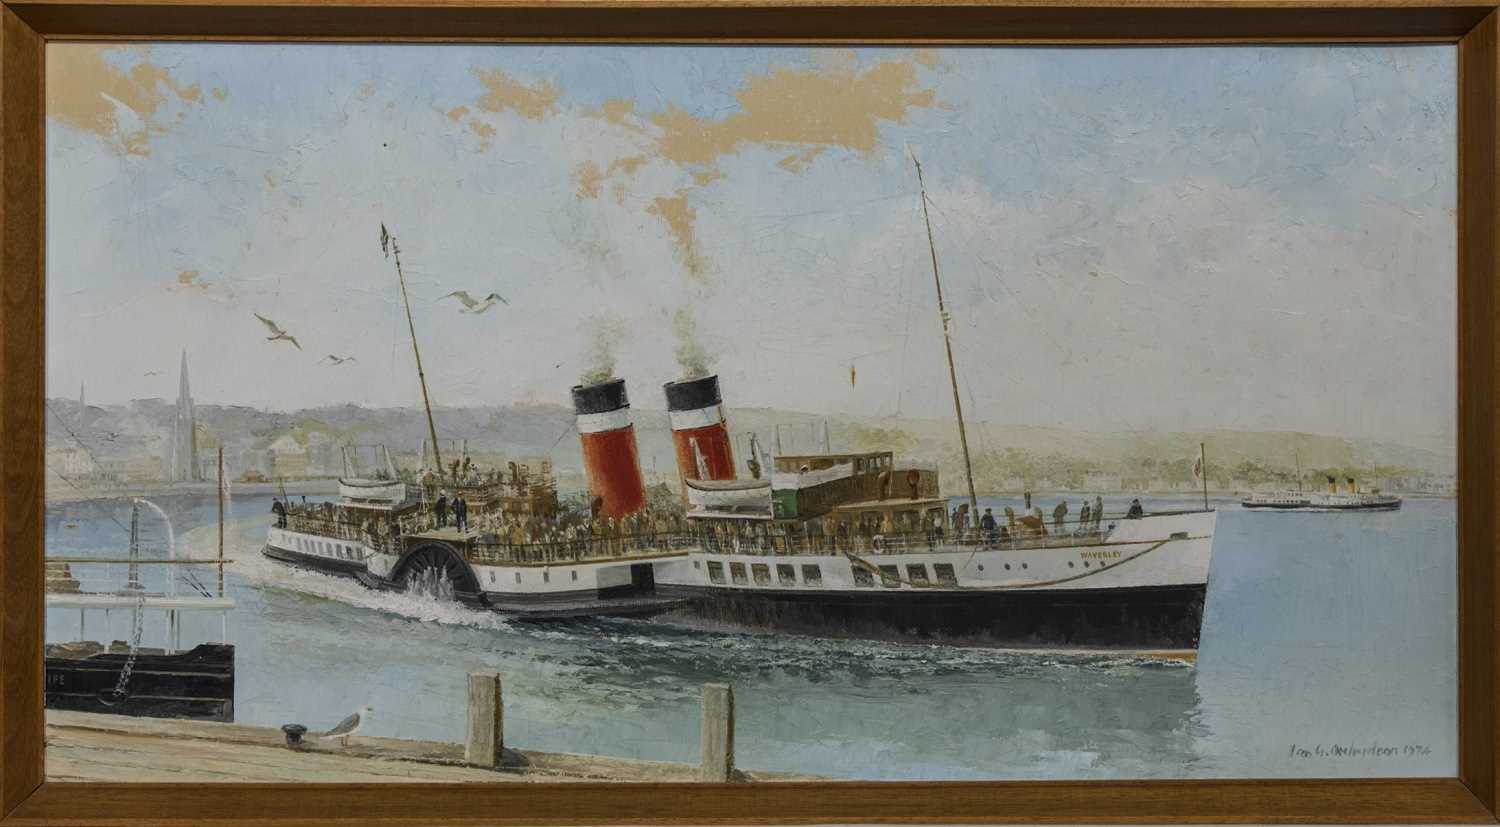 Lot 540 - LNER PADDLE STEAMER 'WAVERLEY' ARRIVING AT ROTHESAY IN SUMMER 1947, AN OIL BY IAN G ORCHARDSON